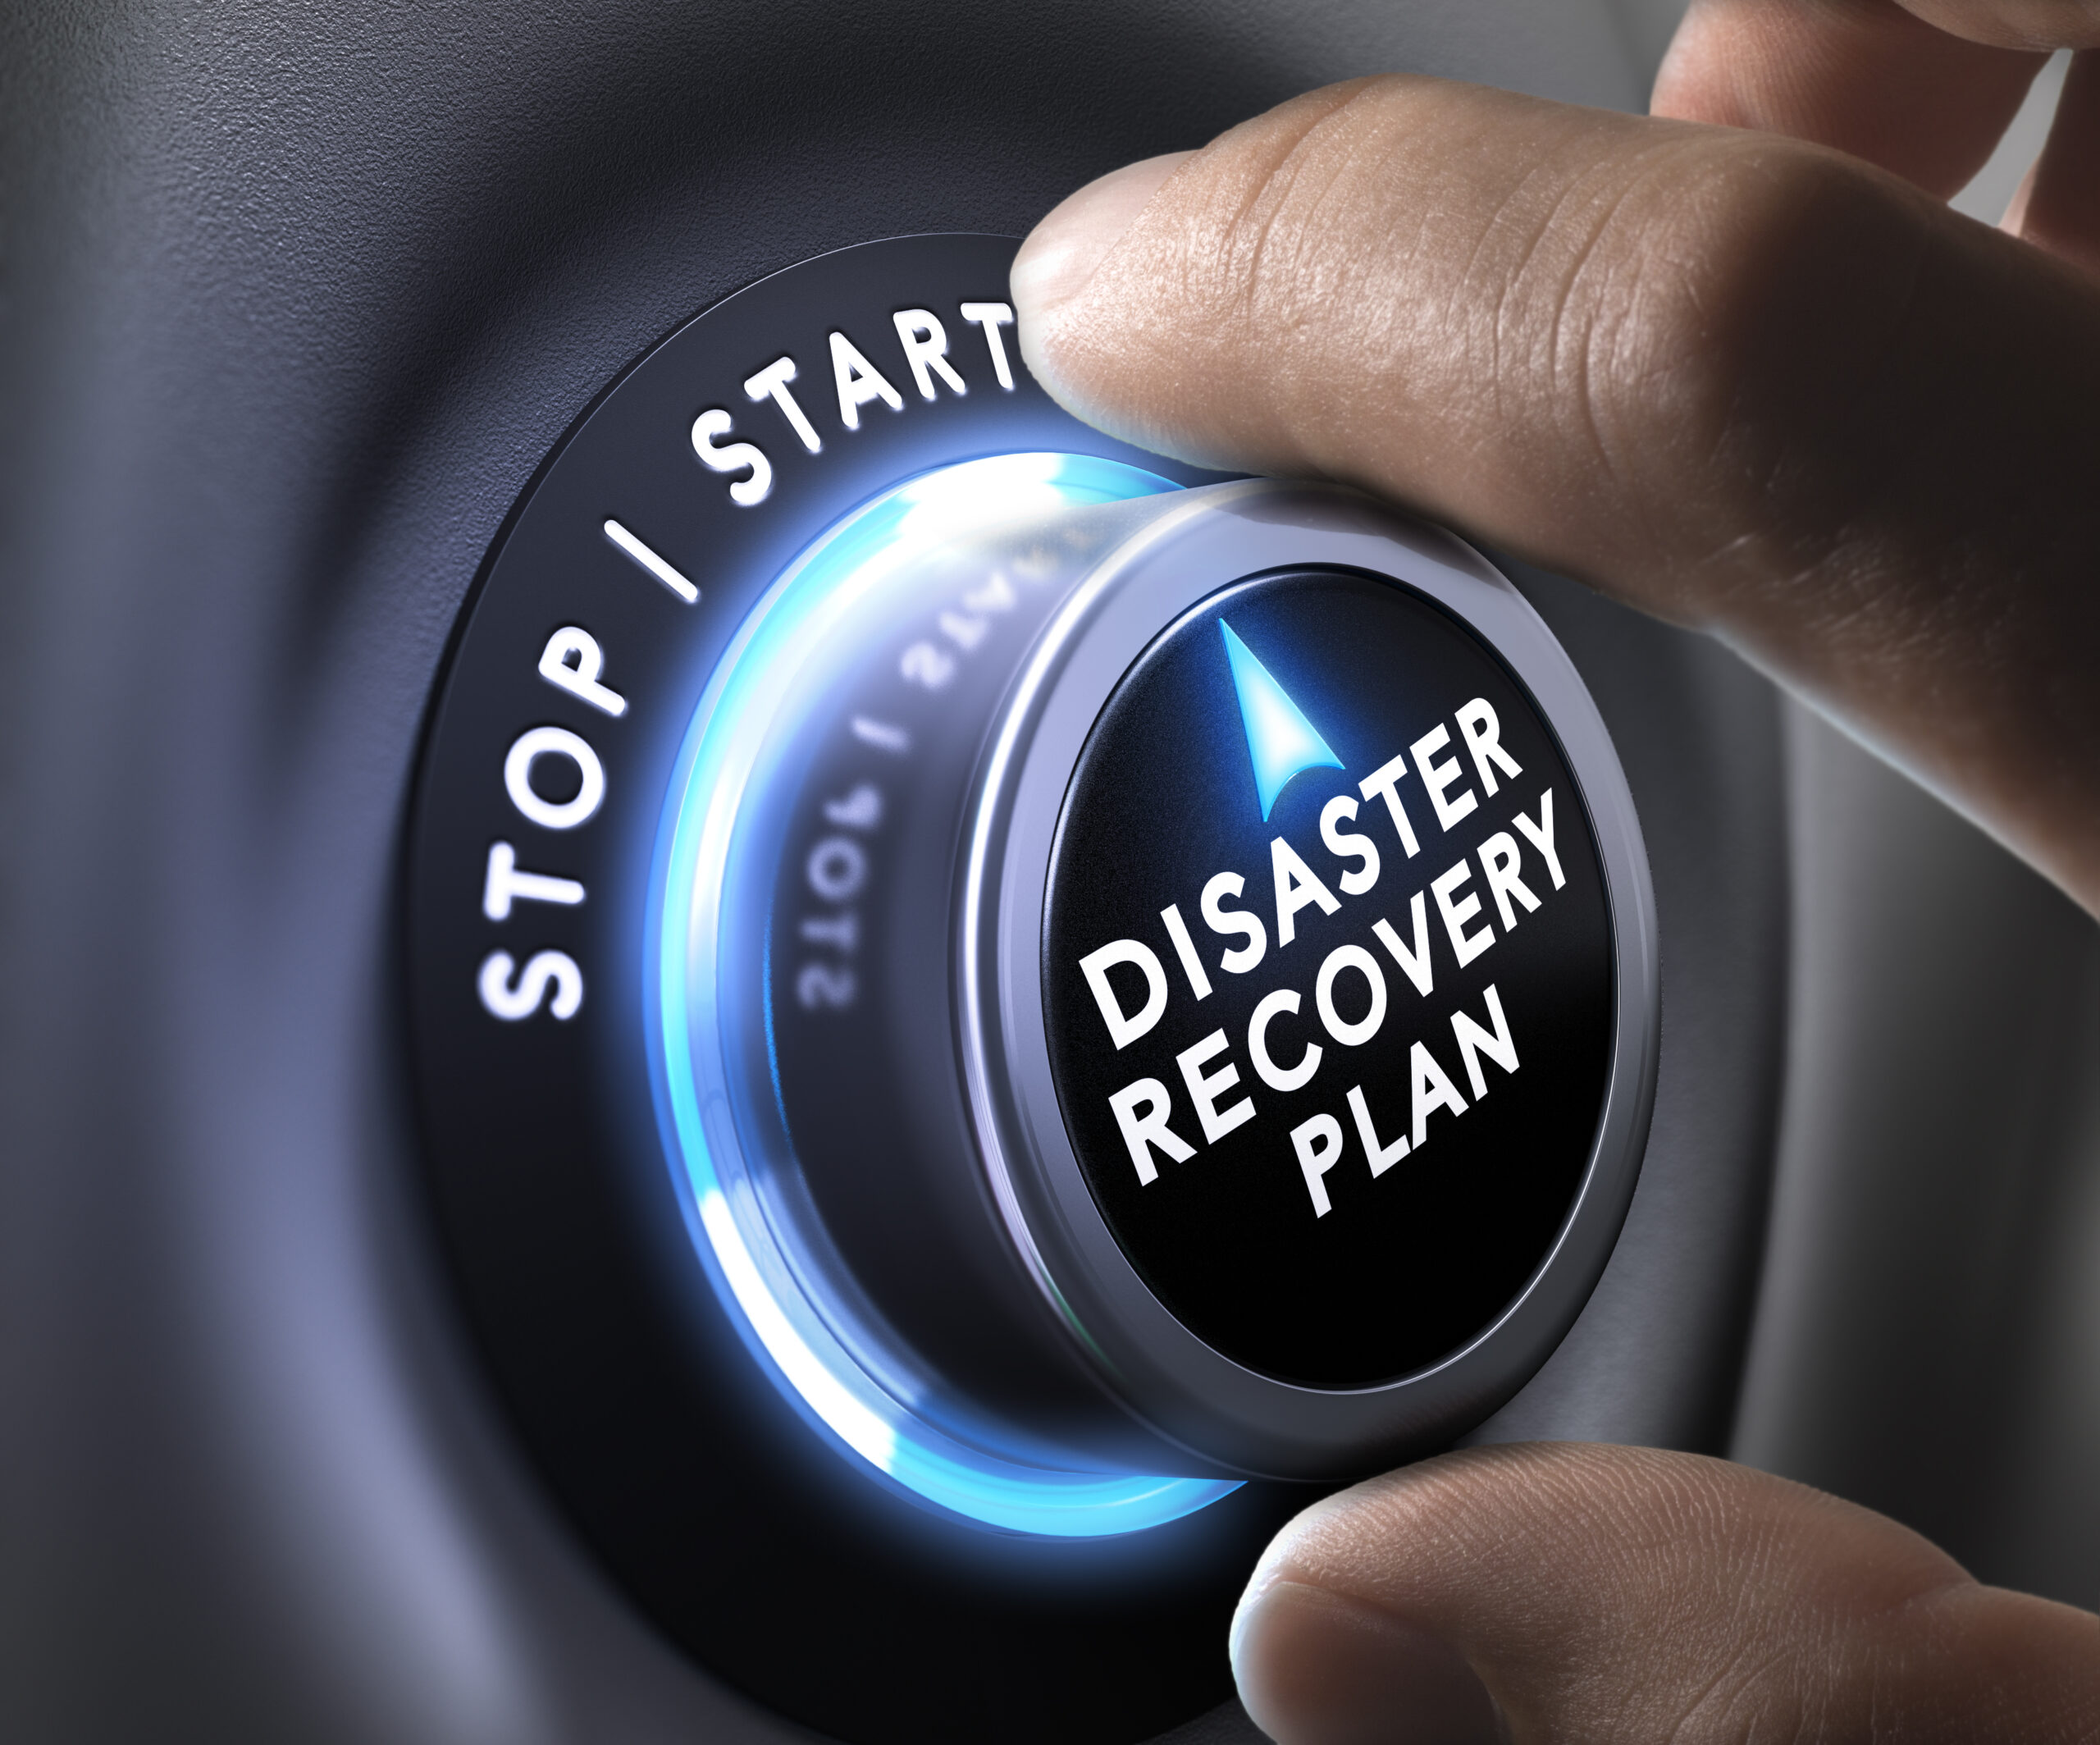 Disaster Recovery Plan scaled